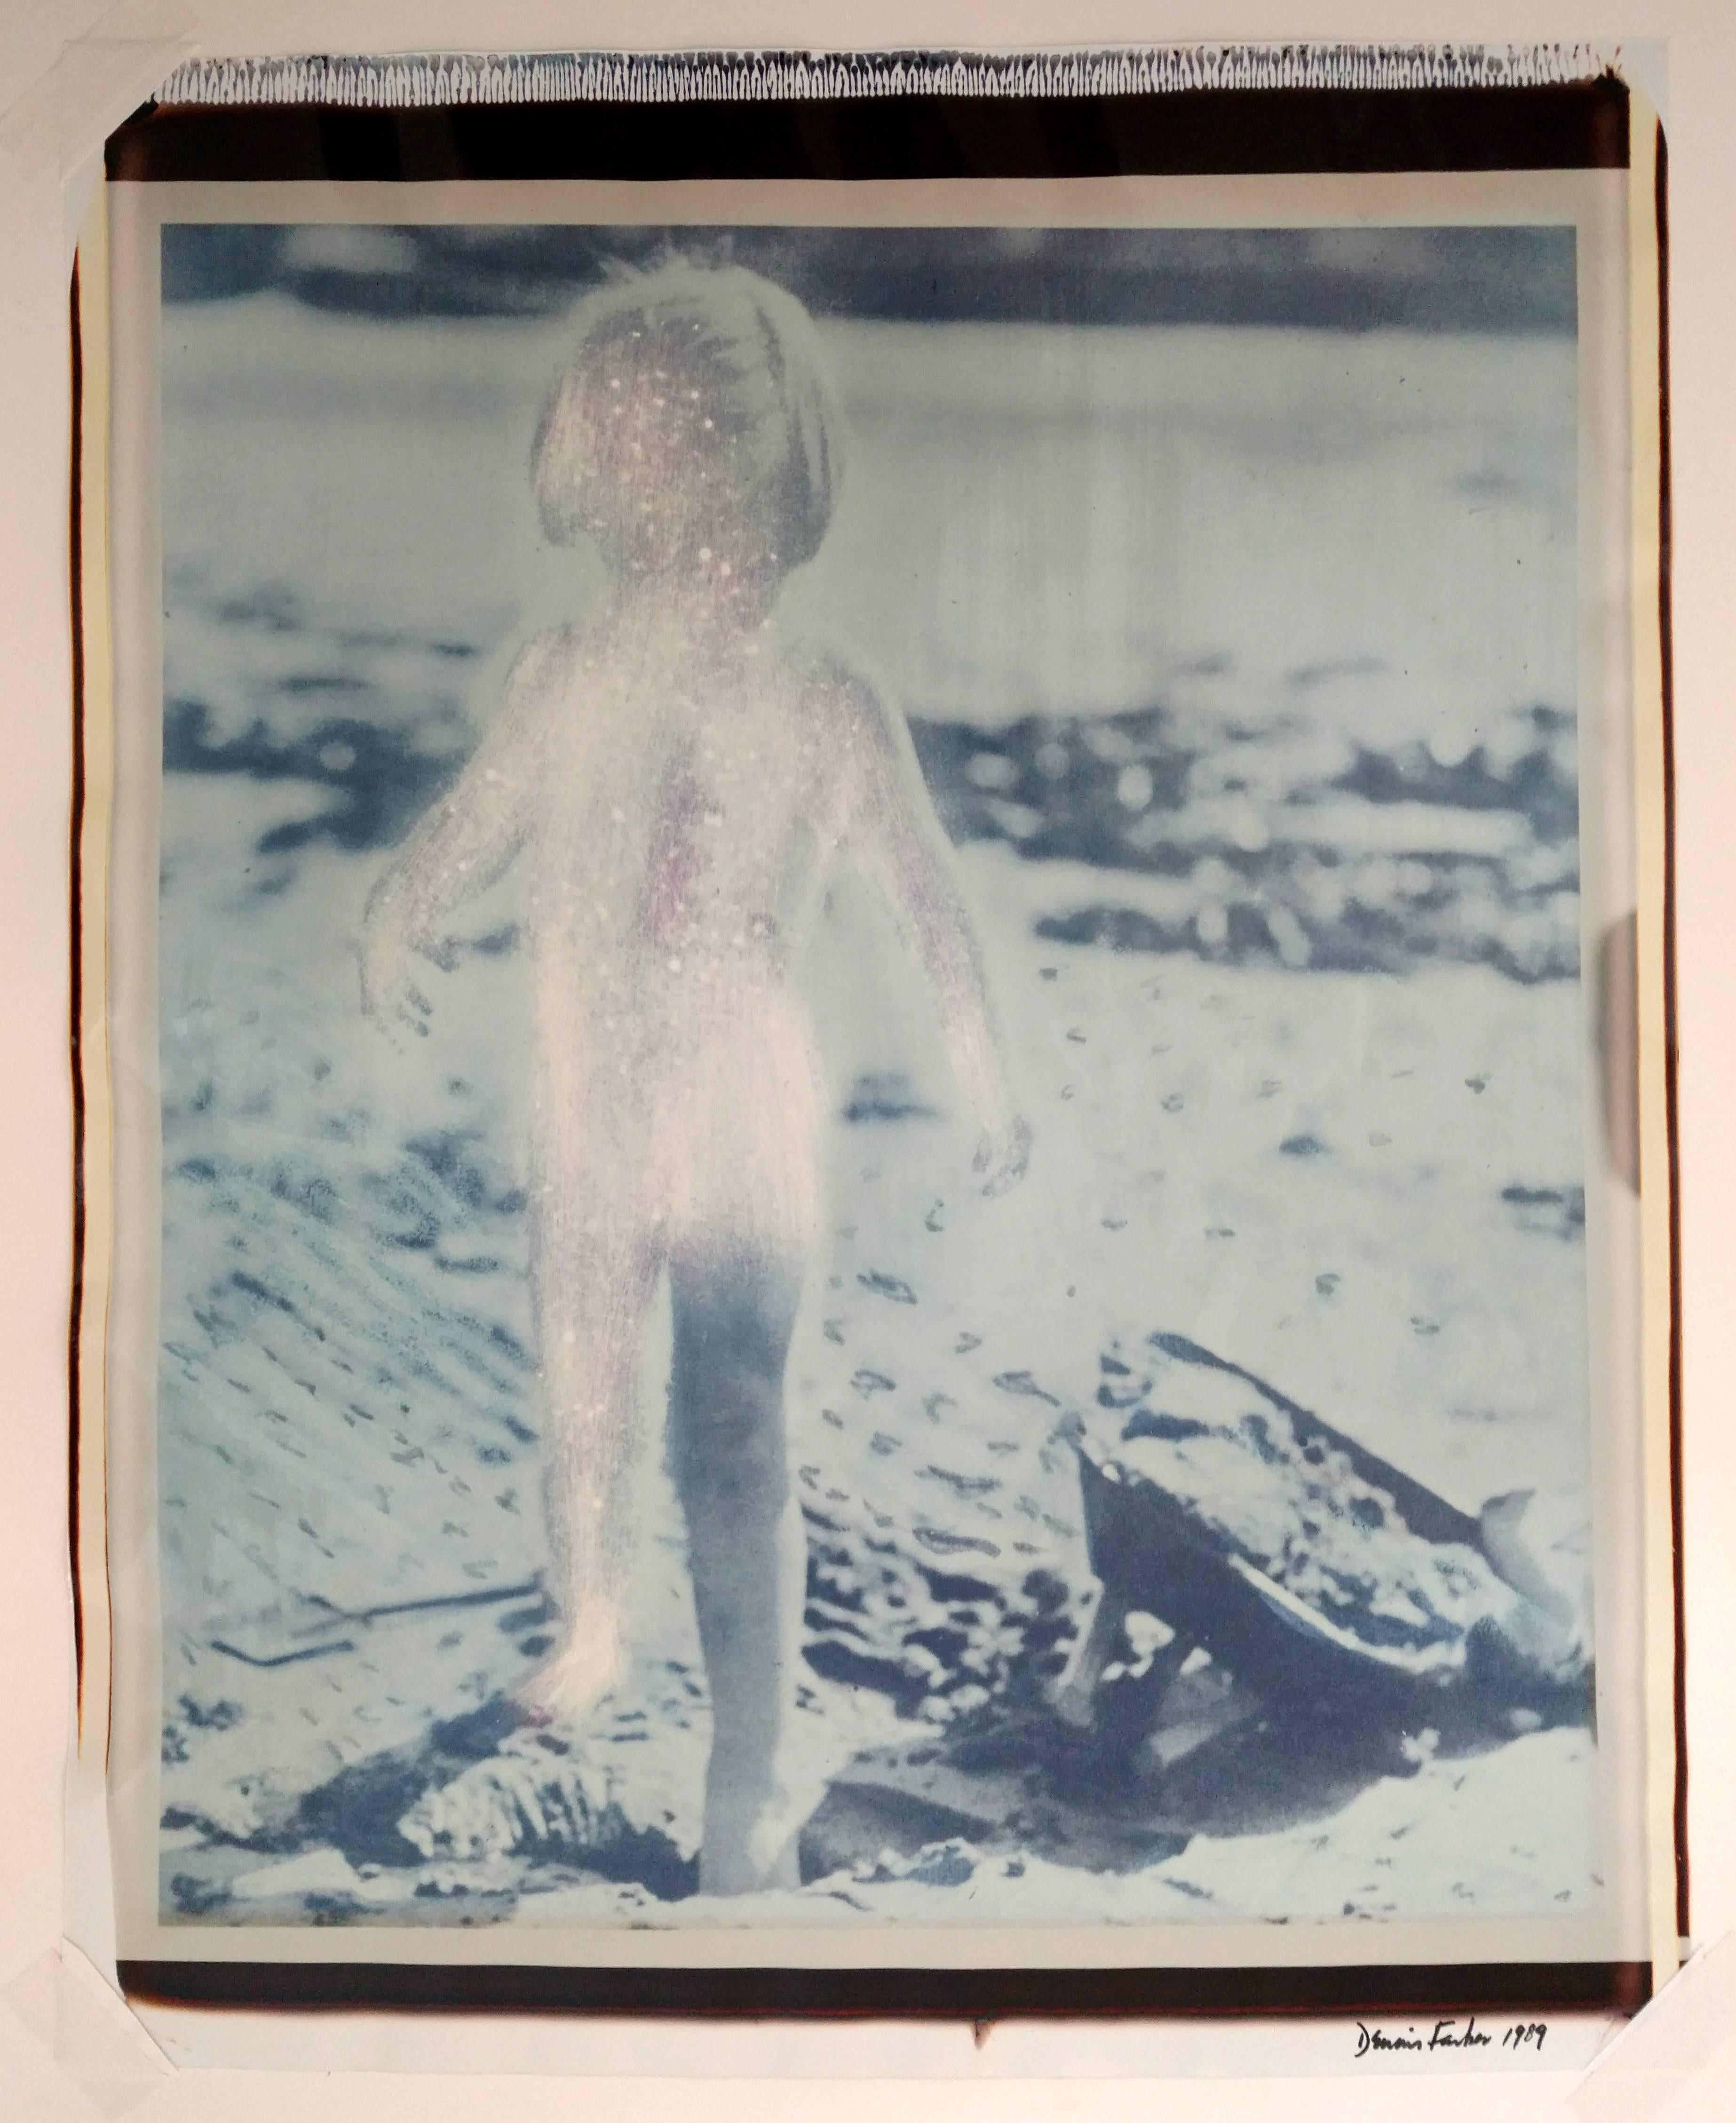 Dennis Farber Figurative Photograph - Large Format Vintage Color 20X24 Polaroid "Radiant Child" signed and dated